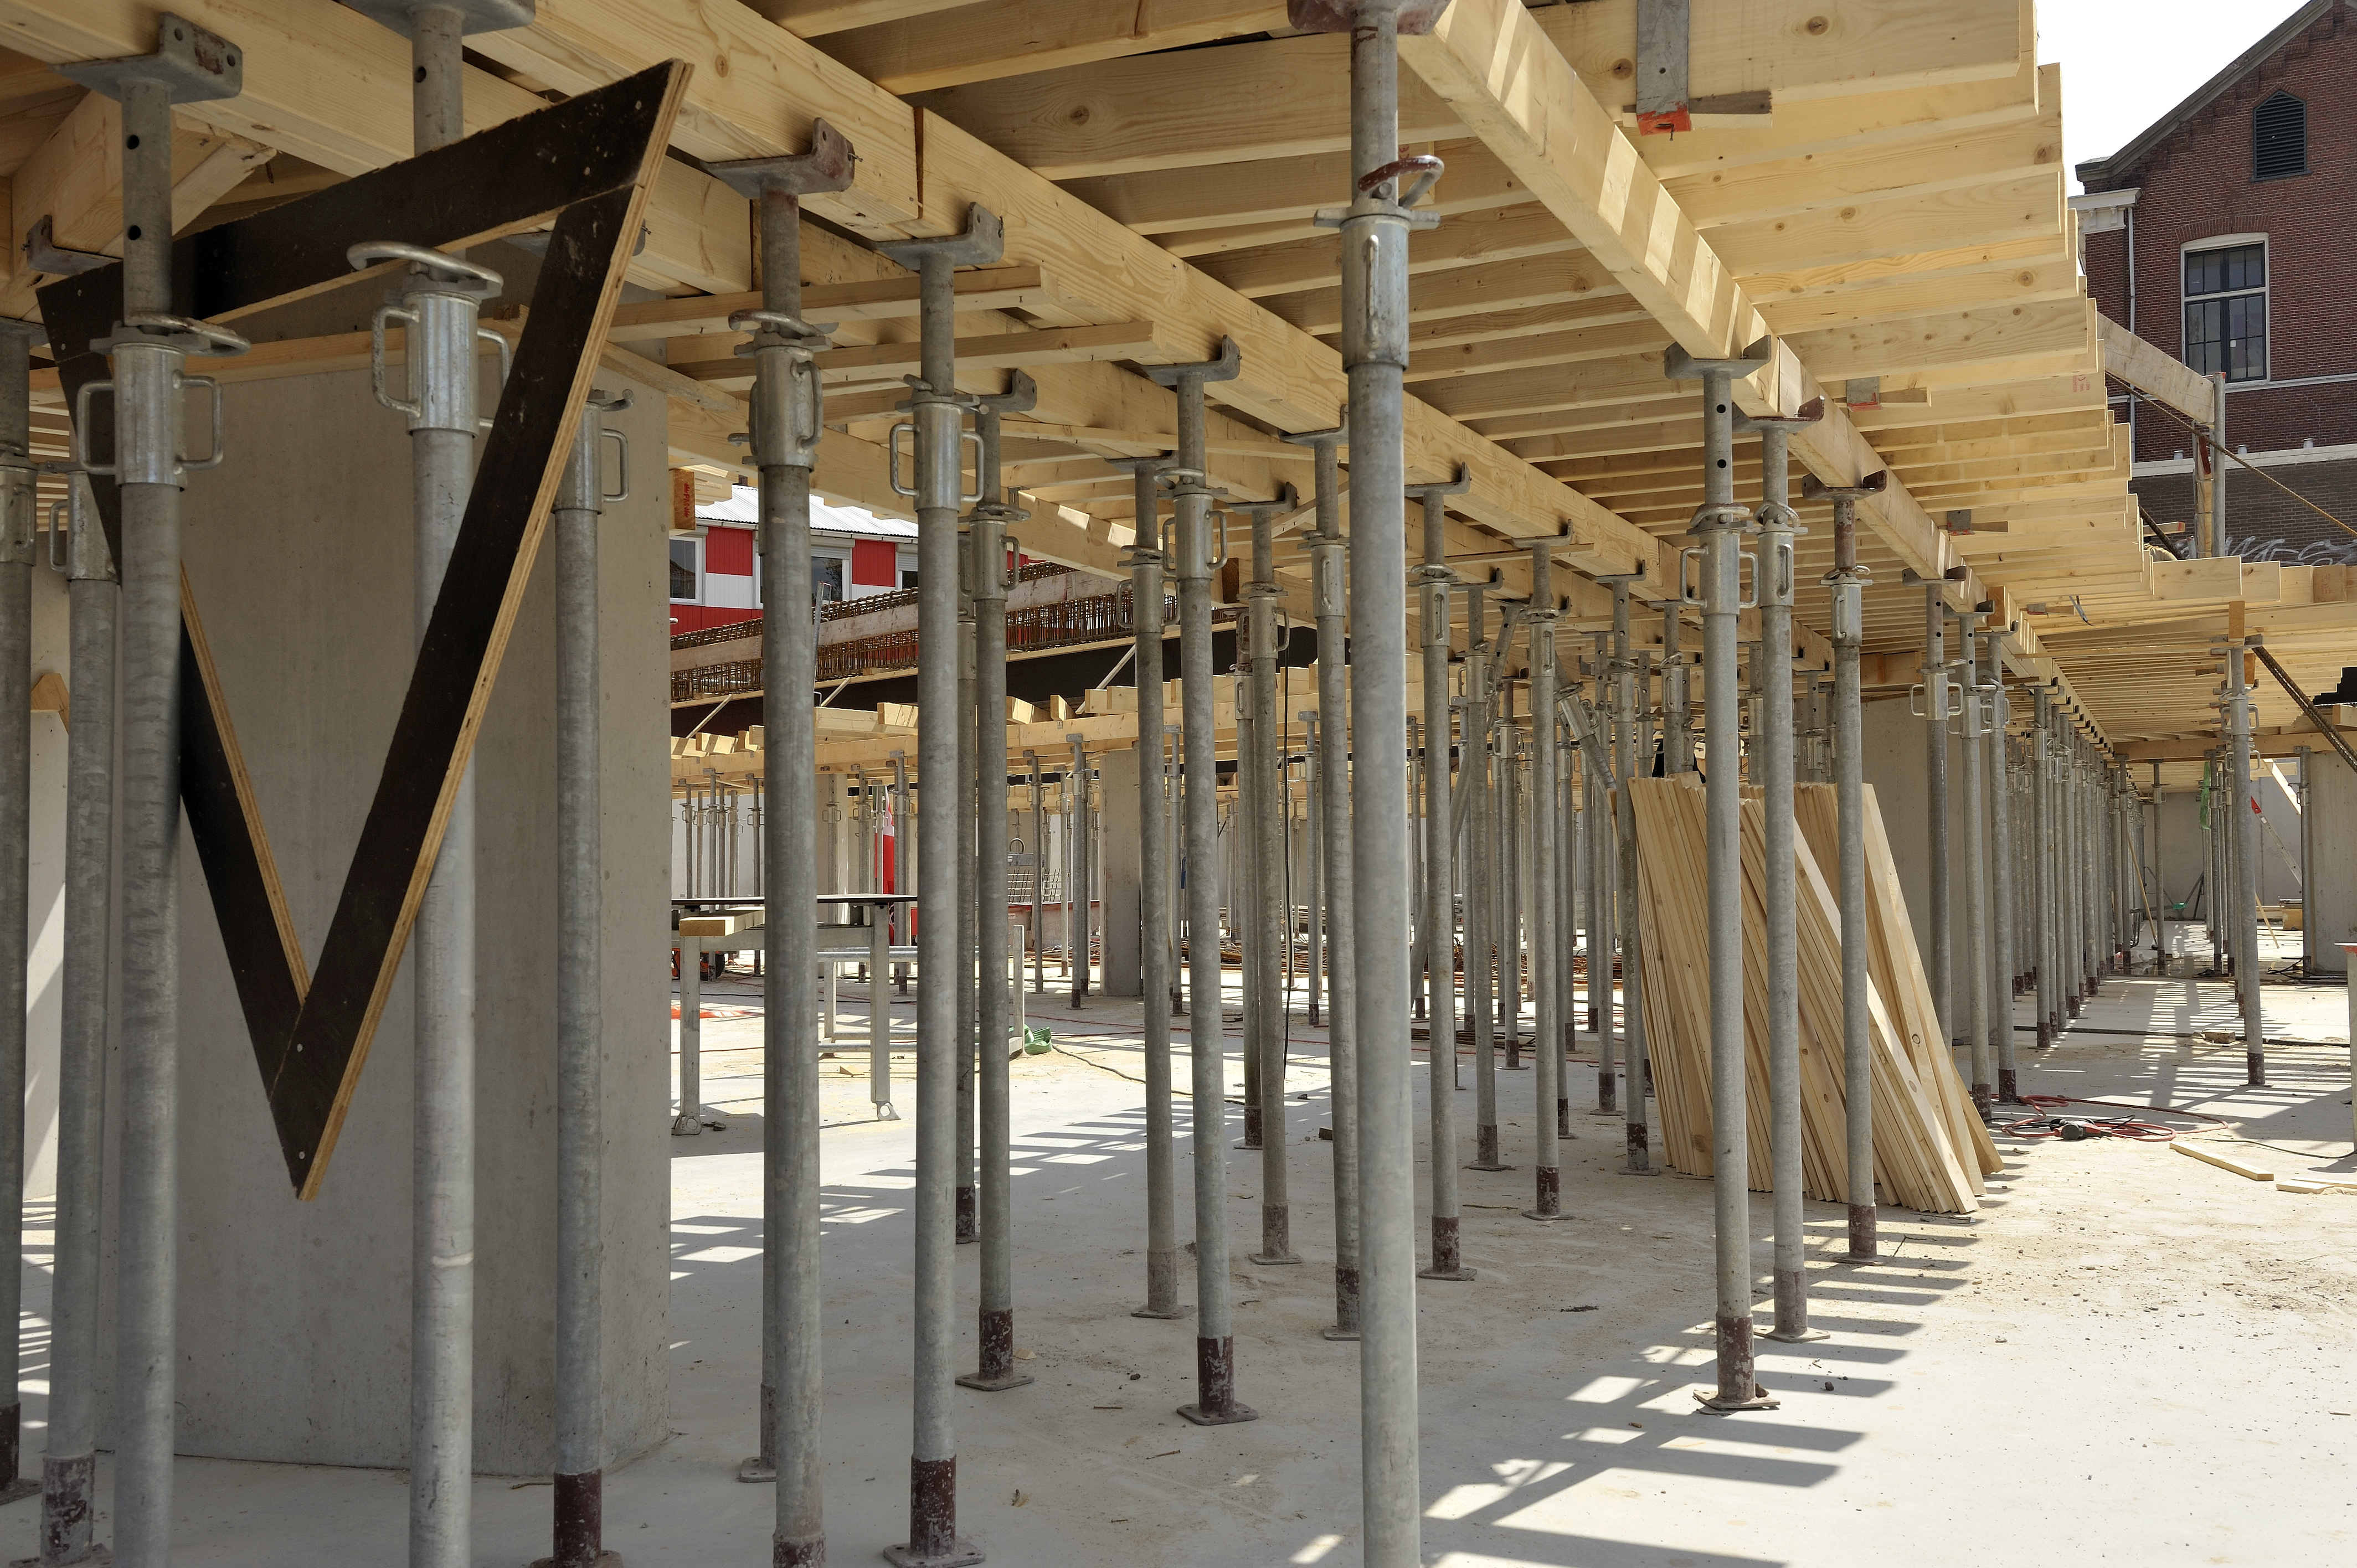 Scaffolding Systems | Ring lock systems | galvanized steel | Ringlock scaffolding systems